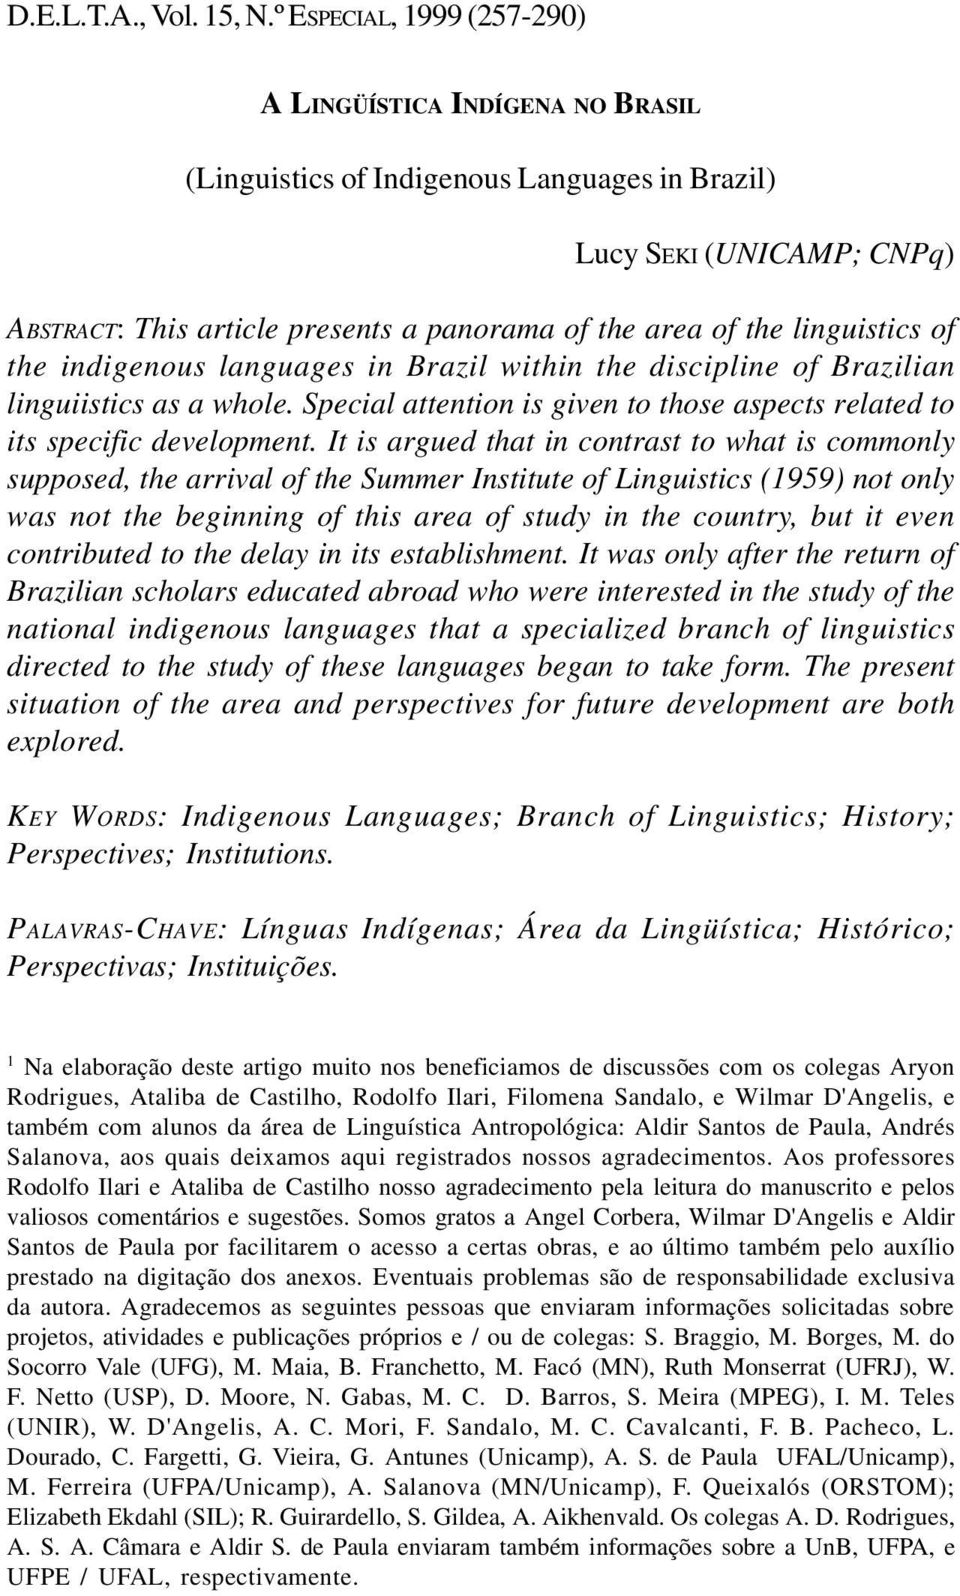 linguistics of the indigenous languages in Brazil within the discipline of Brazilian linguiistics as a whole. Special attention is given to those aspects related to its specific development.